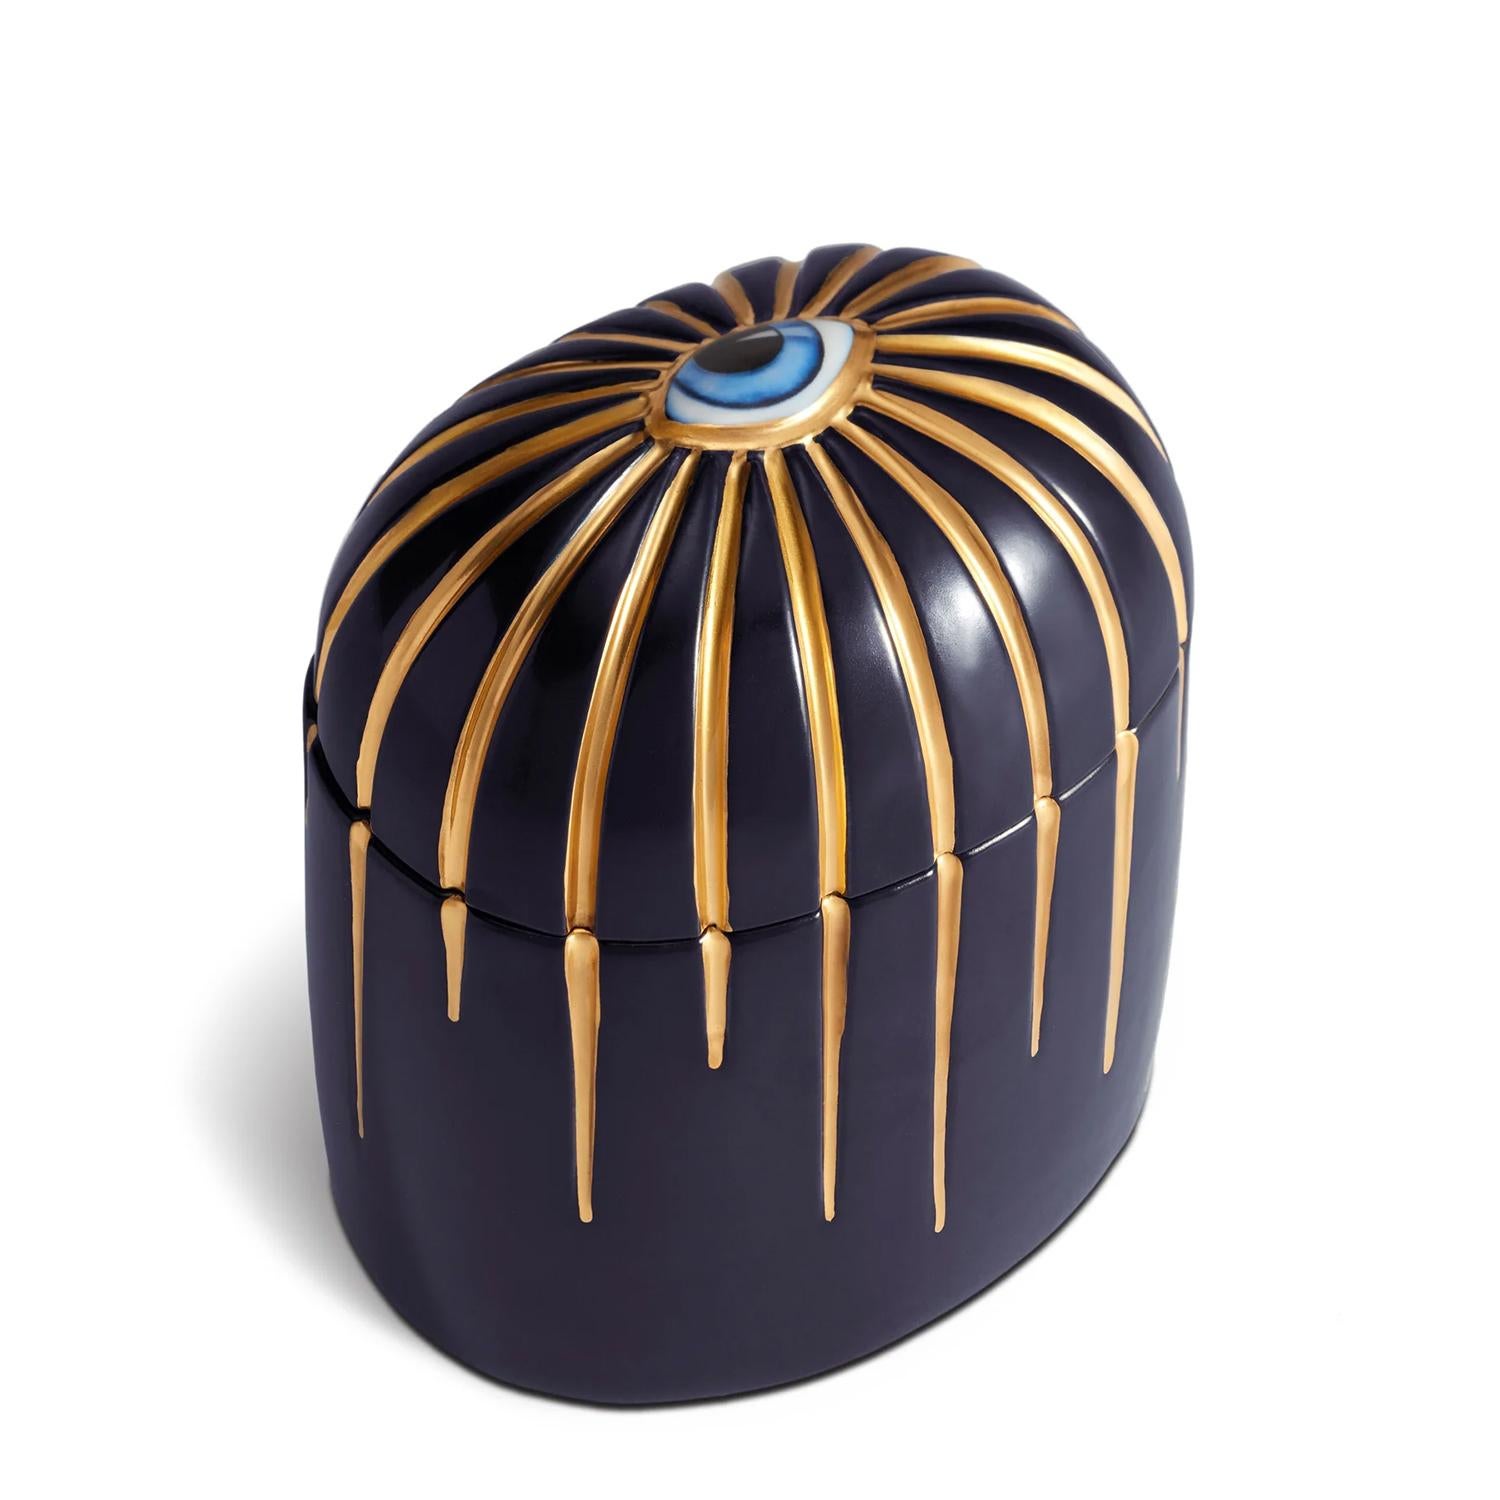 Candle Box Blue Eye 3 made in porcelain with
a porcelain blue eye on the lid. In deep blue 
finish porcelain with 24-karat gold-plated pattern. 
Include paraffin wax with 3 wicks, fragrance 
green vetiver. Delivered in a luxury gift box.